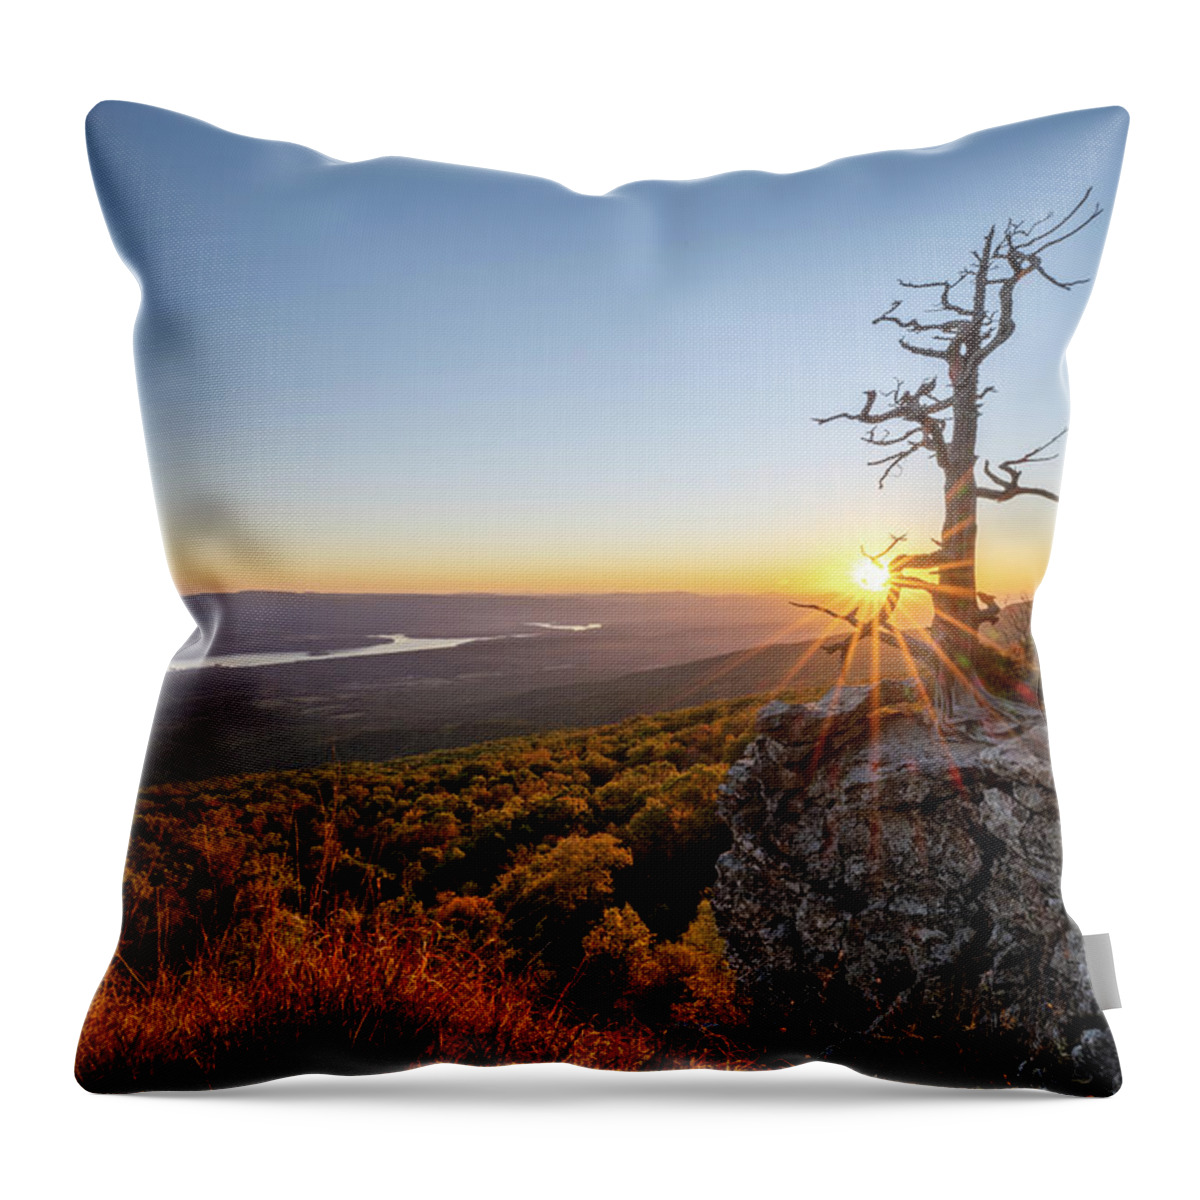 Hello Sunset Throw Pillow featuring the photograph Hello Sunset by George Buxbaum